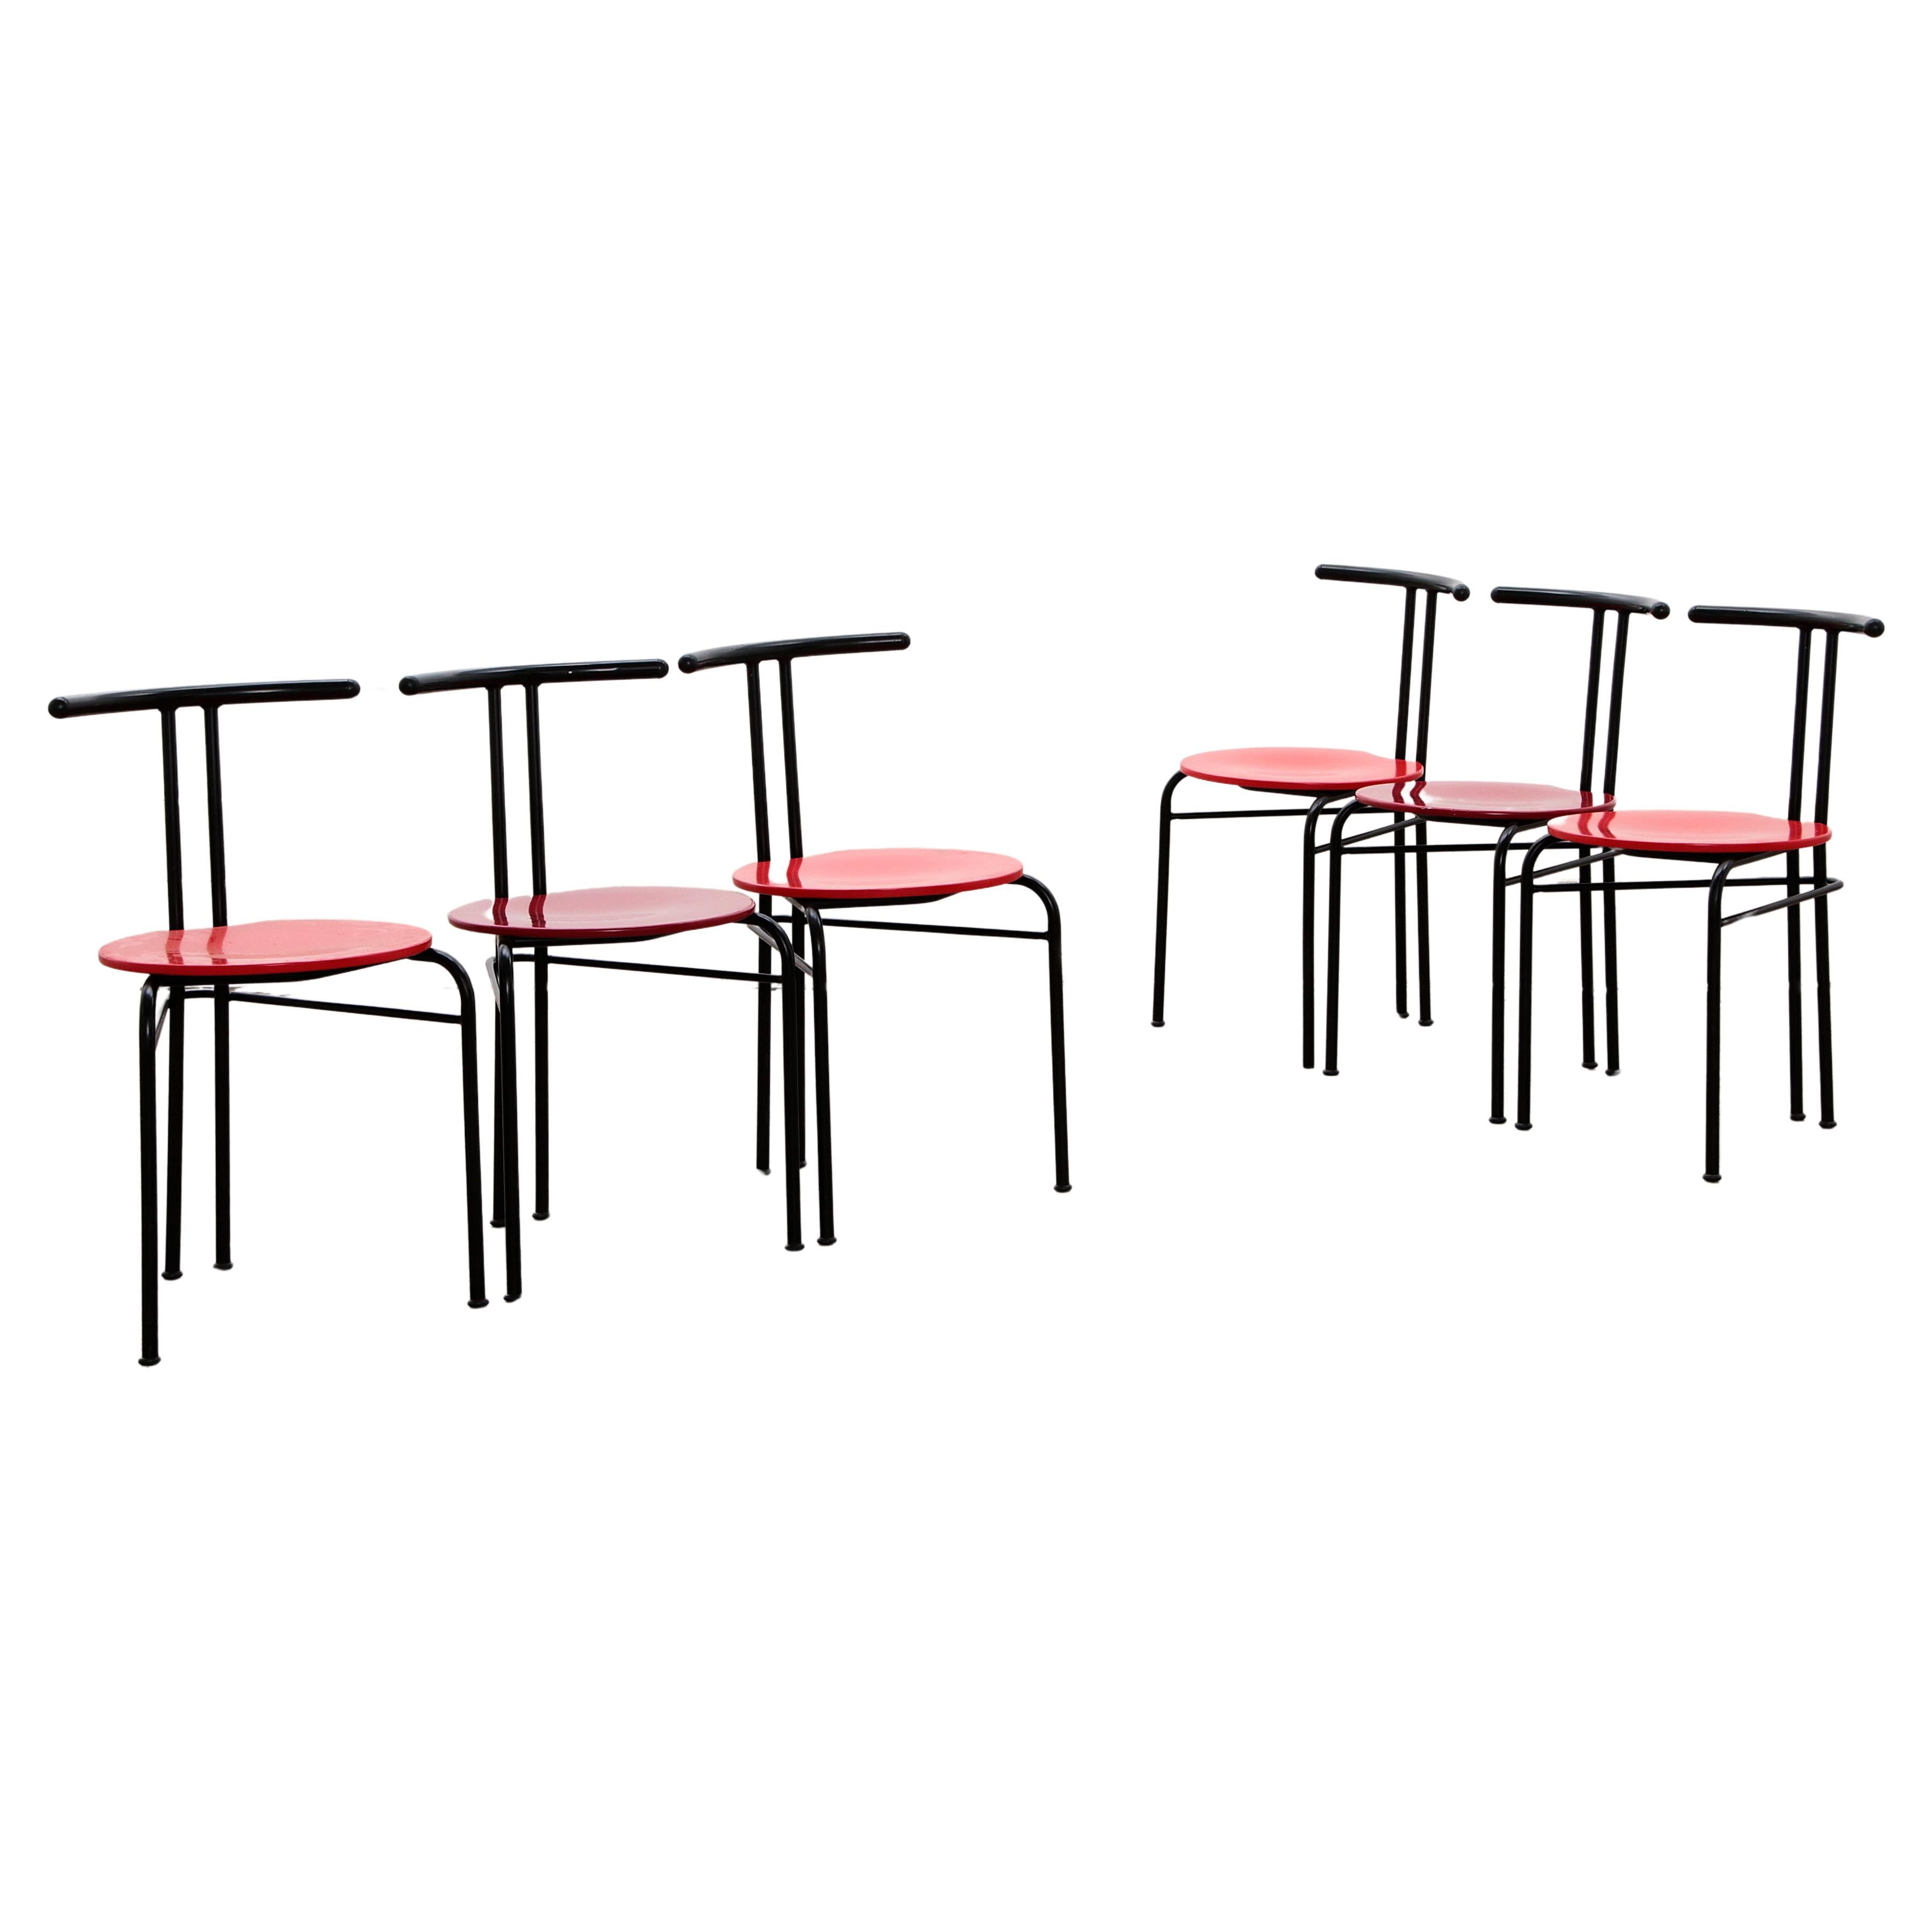 Postmodern Dining Table Chairs with Red Seat - Set of 6 For Sale